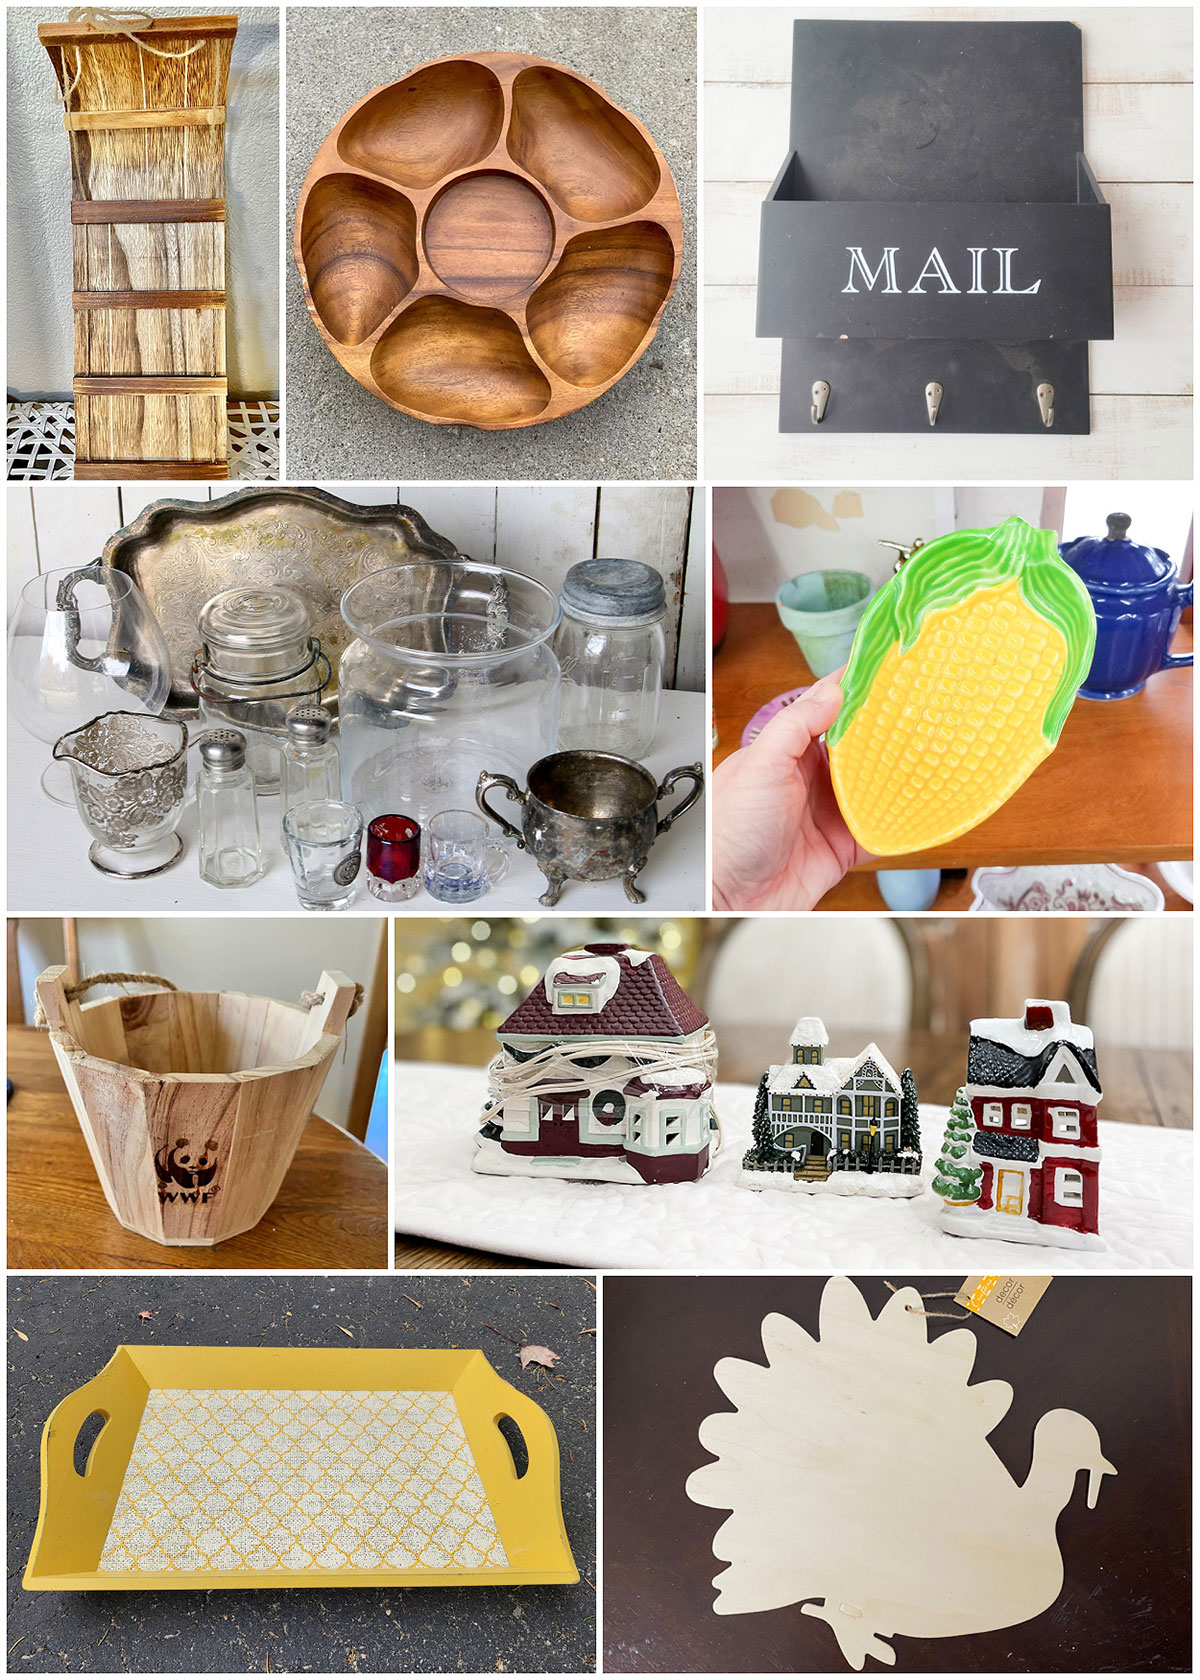 Thrift store finds upcycled into home decor.